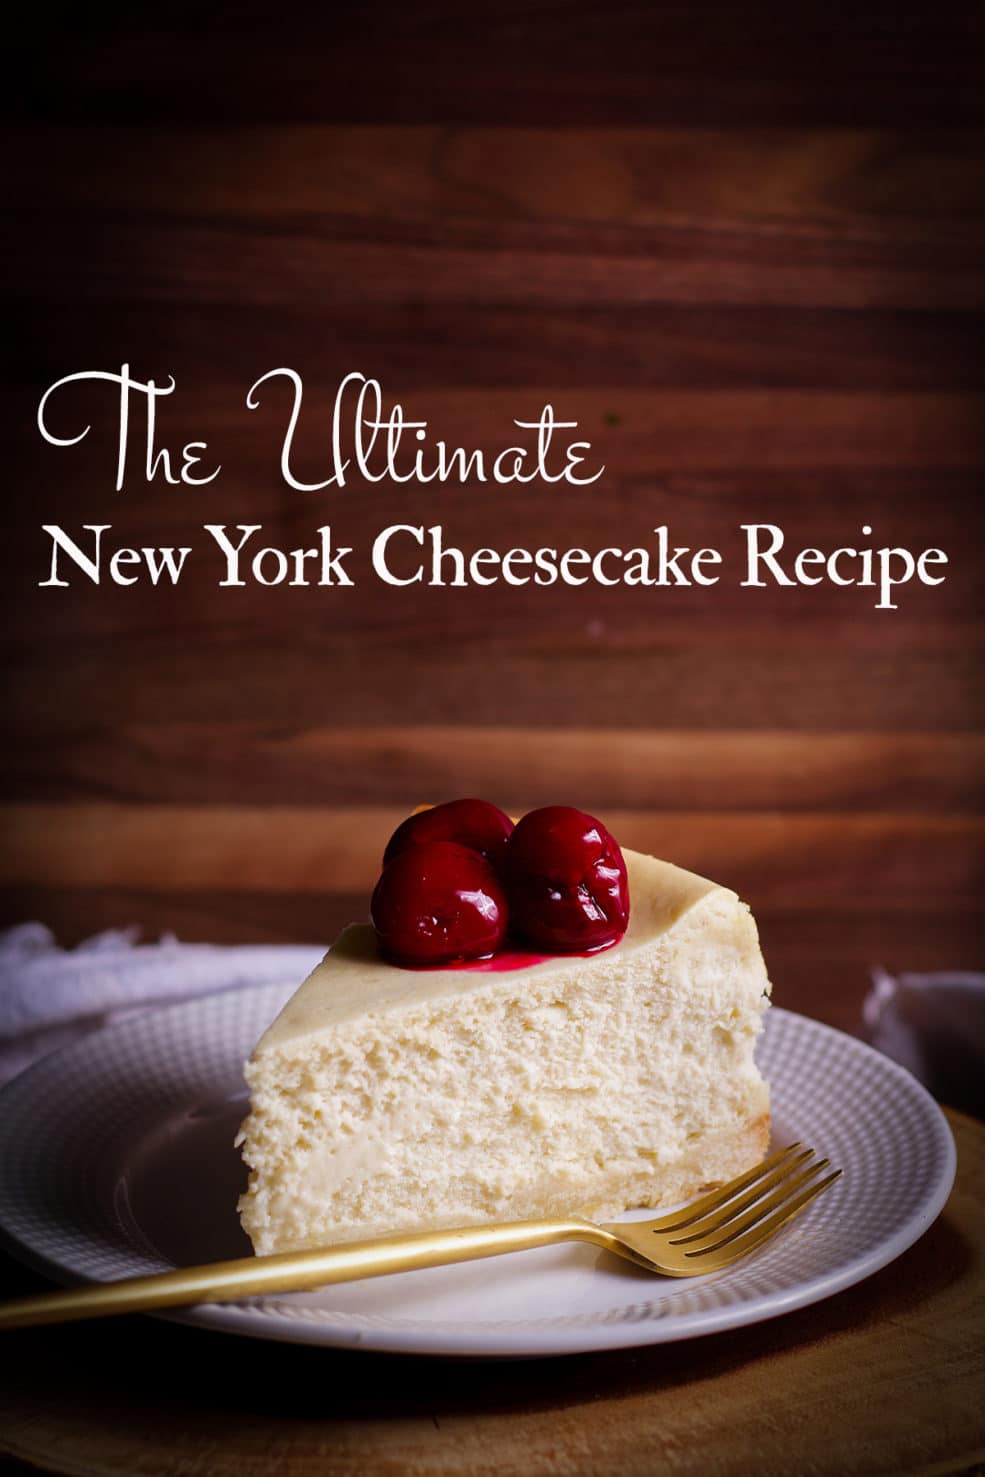 A thick slice of New York Cheesecake with cherry sauce on top on a white plate with a gold fork.